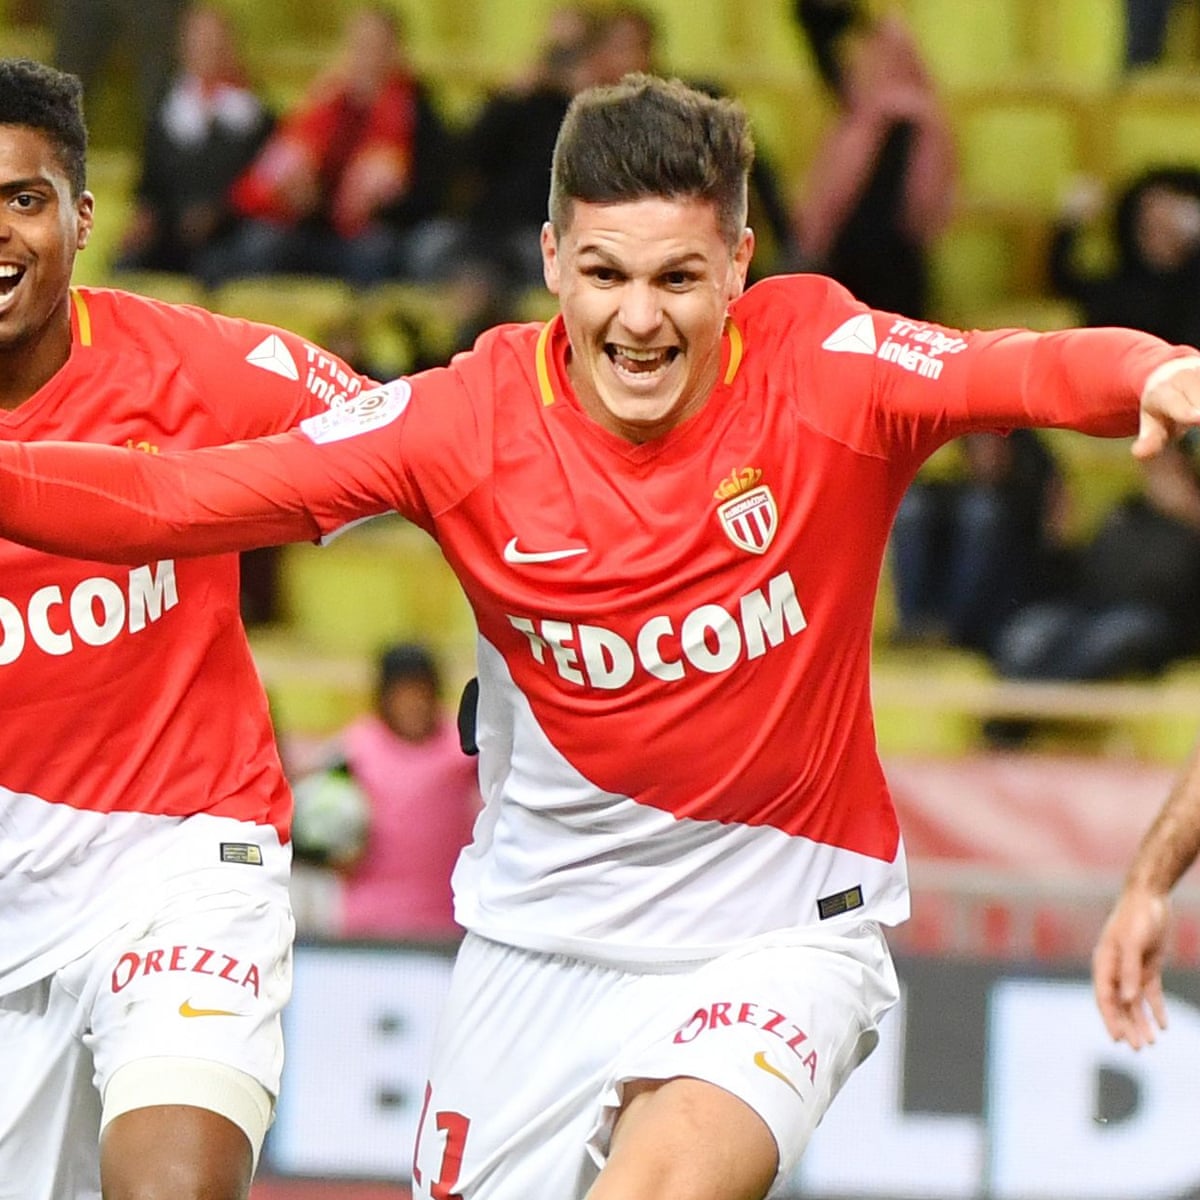 Southampton sign striker Guido Carrillo from Monaco in £19.2m deal | Football | The Guardian